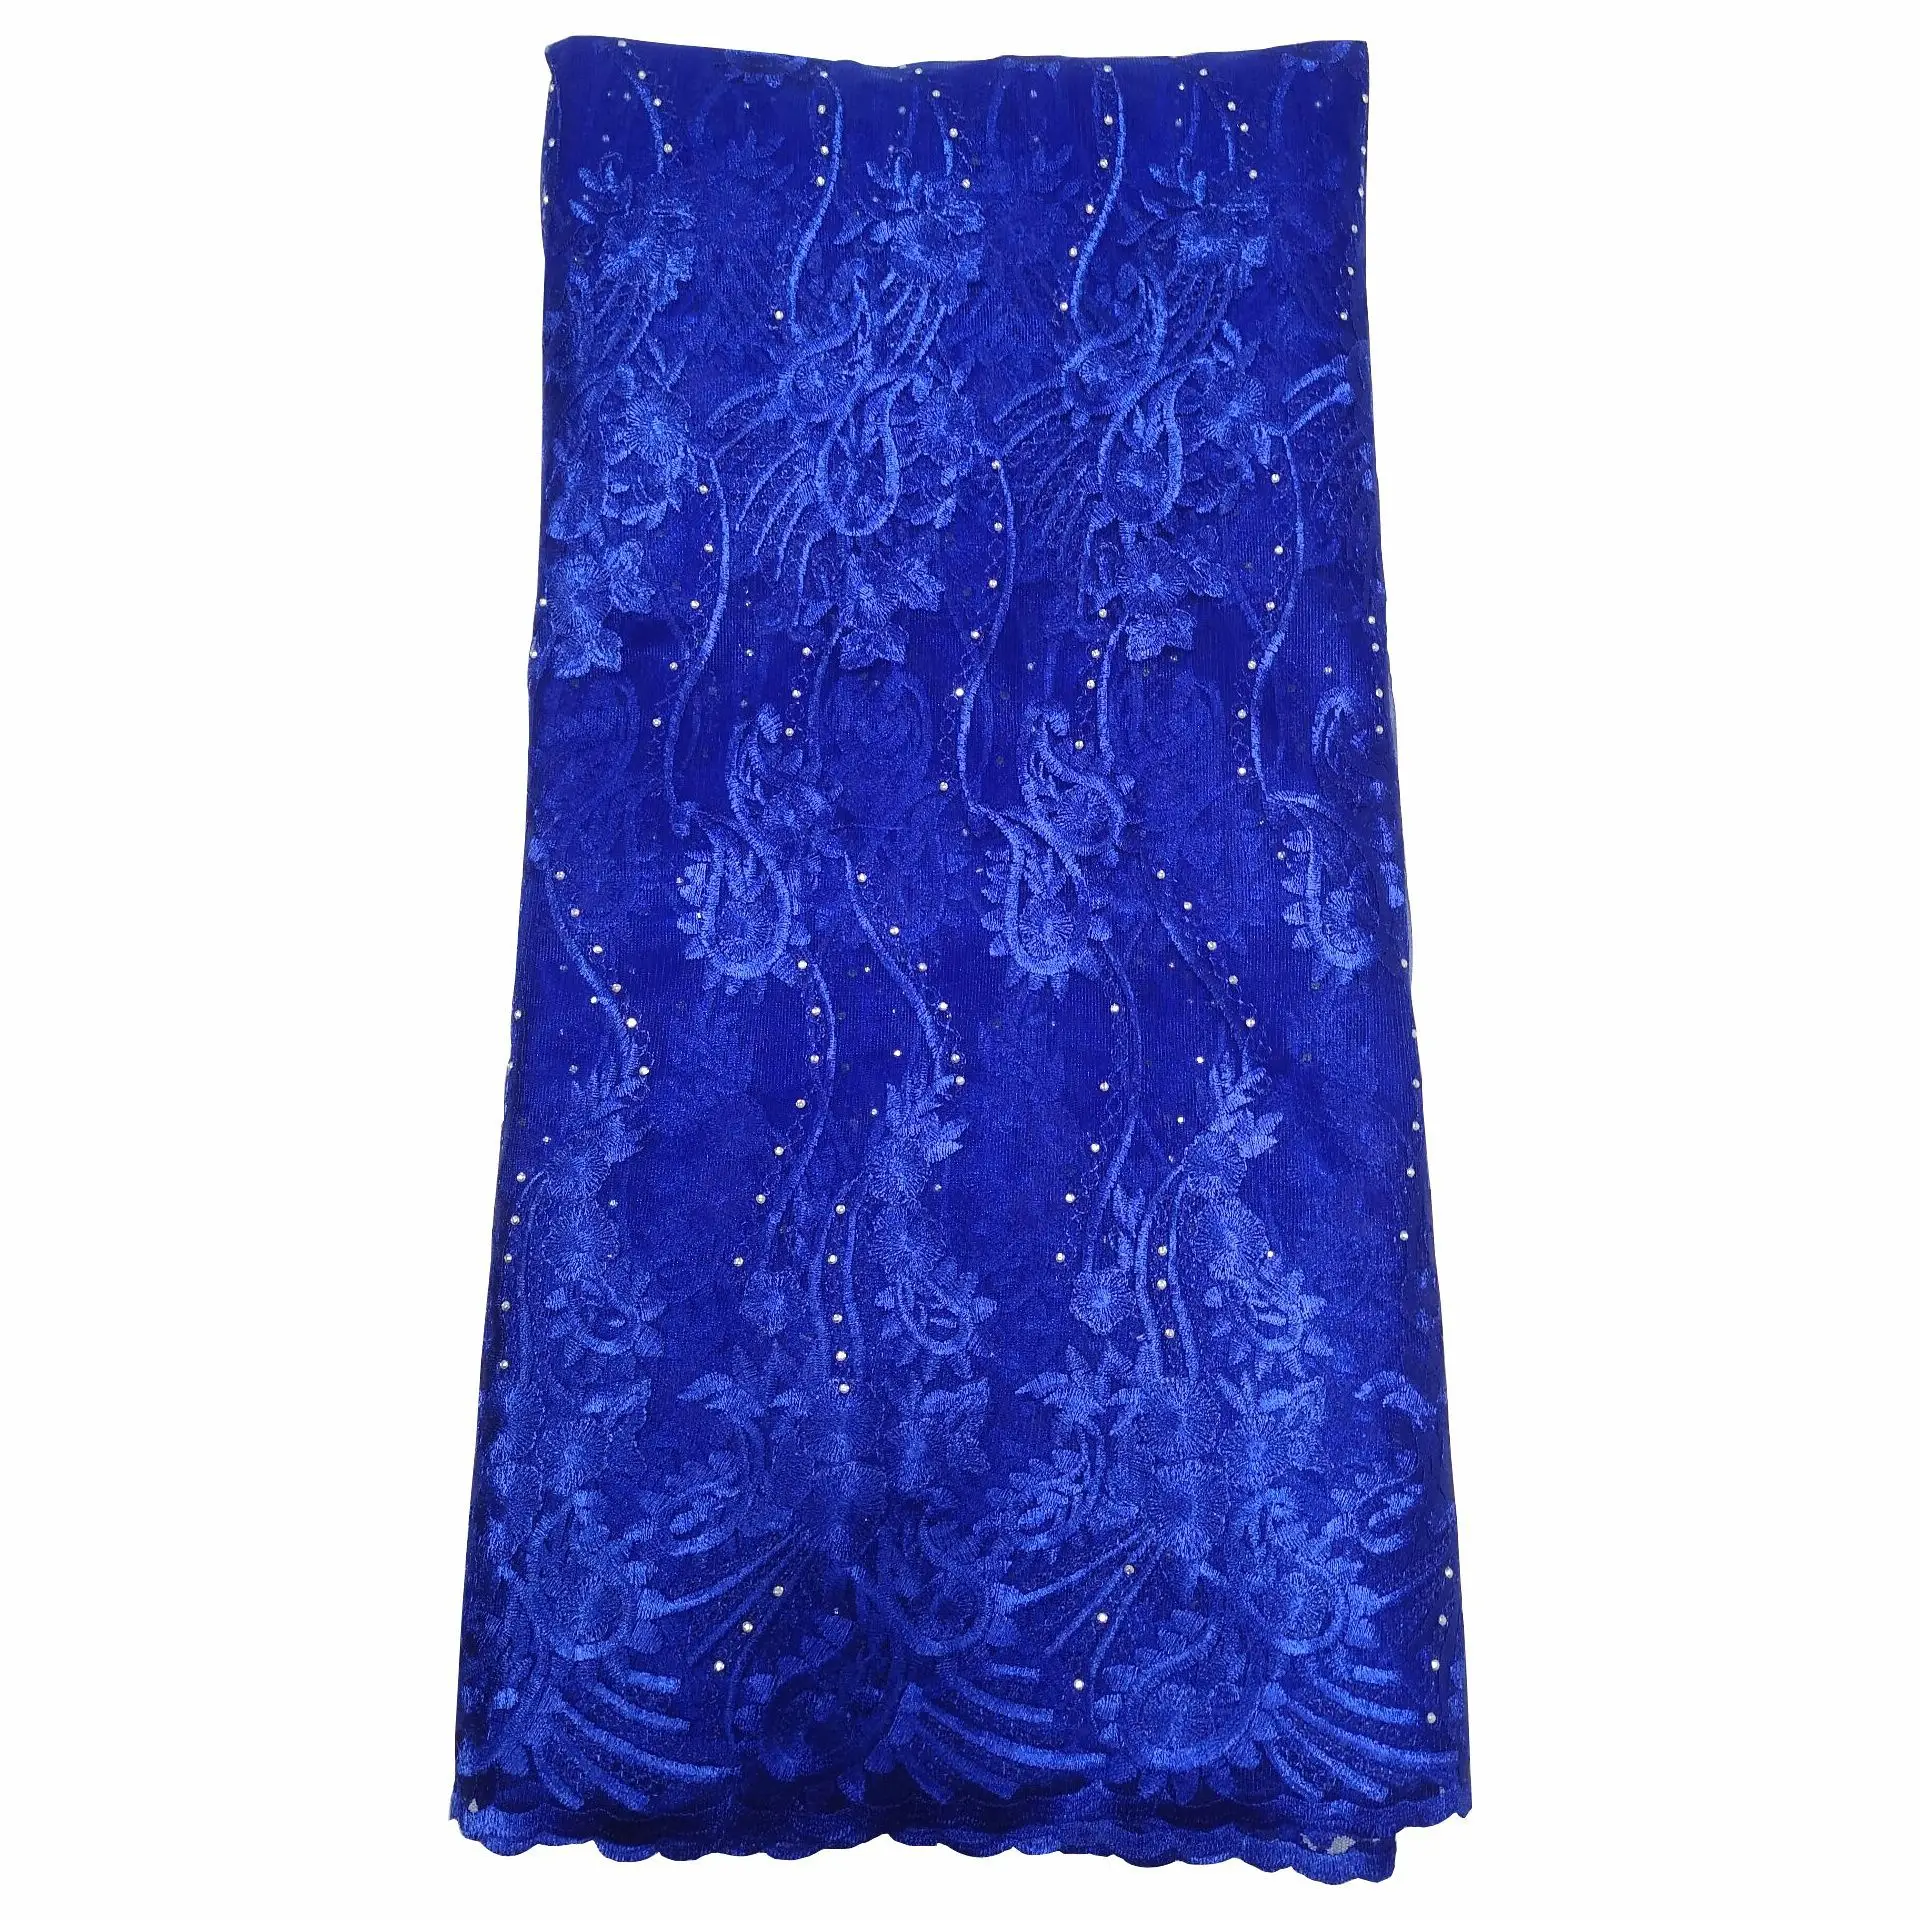 2019 High Quality African French Lace Fabric Blue Swiss Voile Lace in Switzerland With Stones Lace Fabric